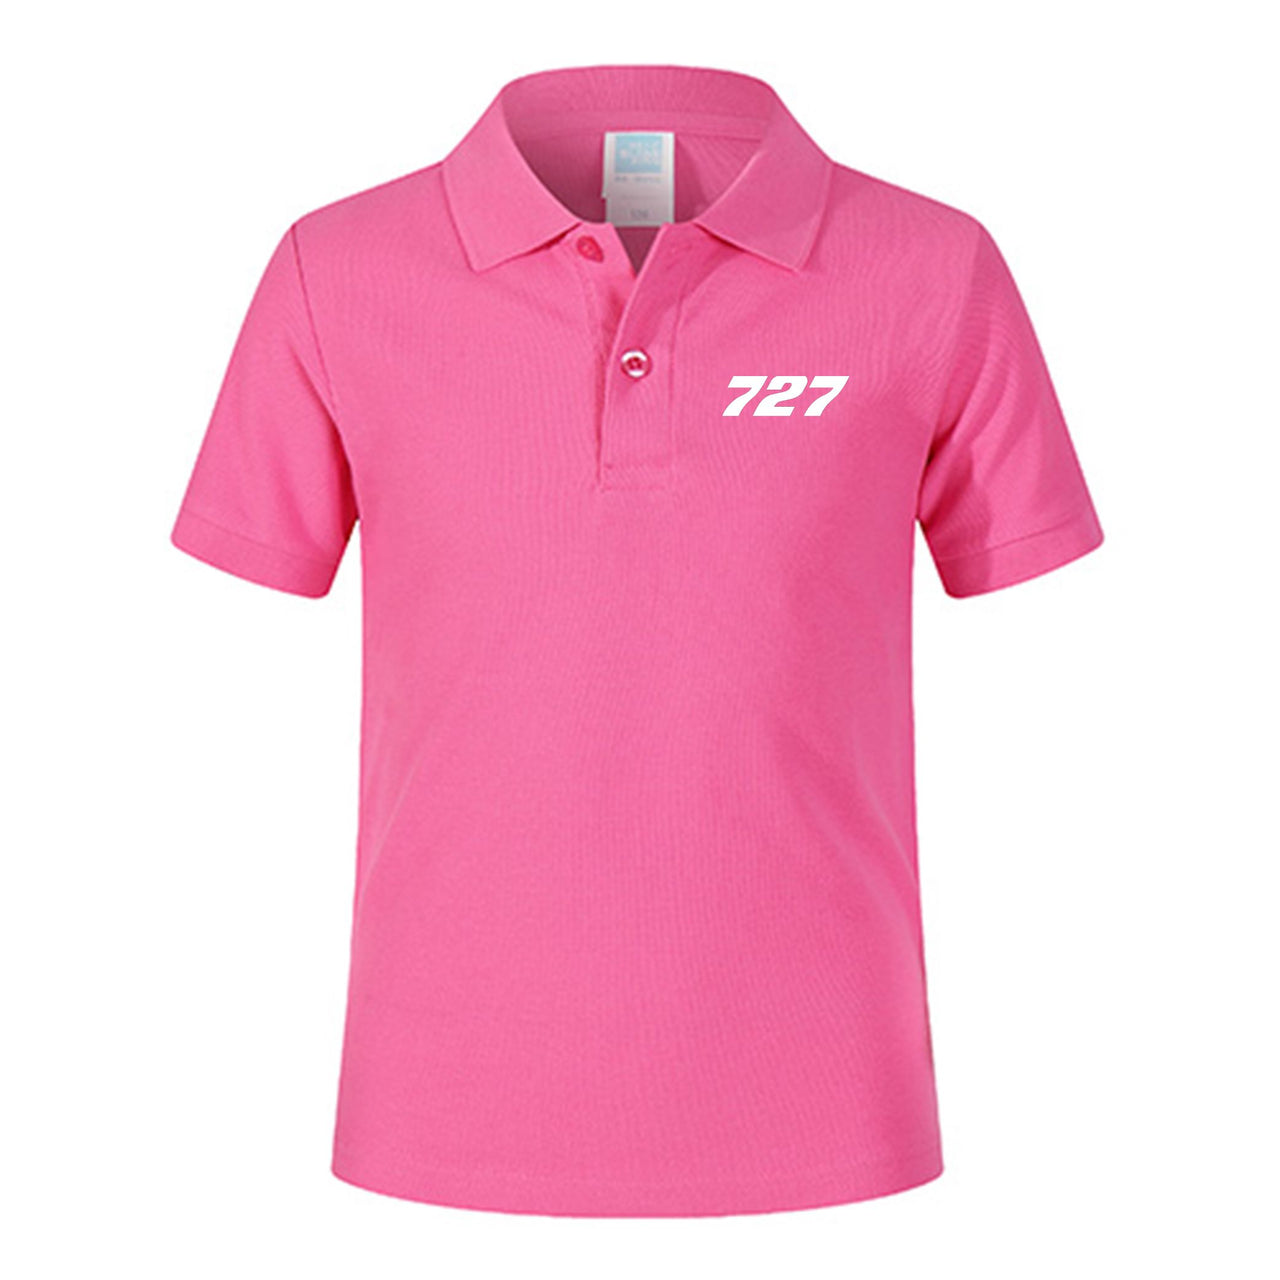 727 Flat Text Designed Children Polo T-Shirts